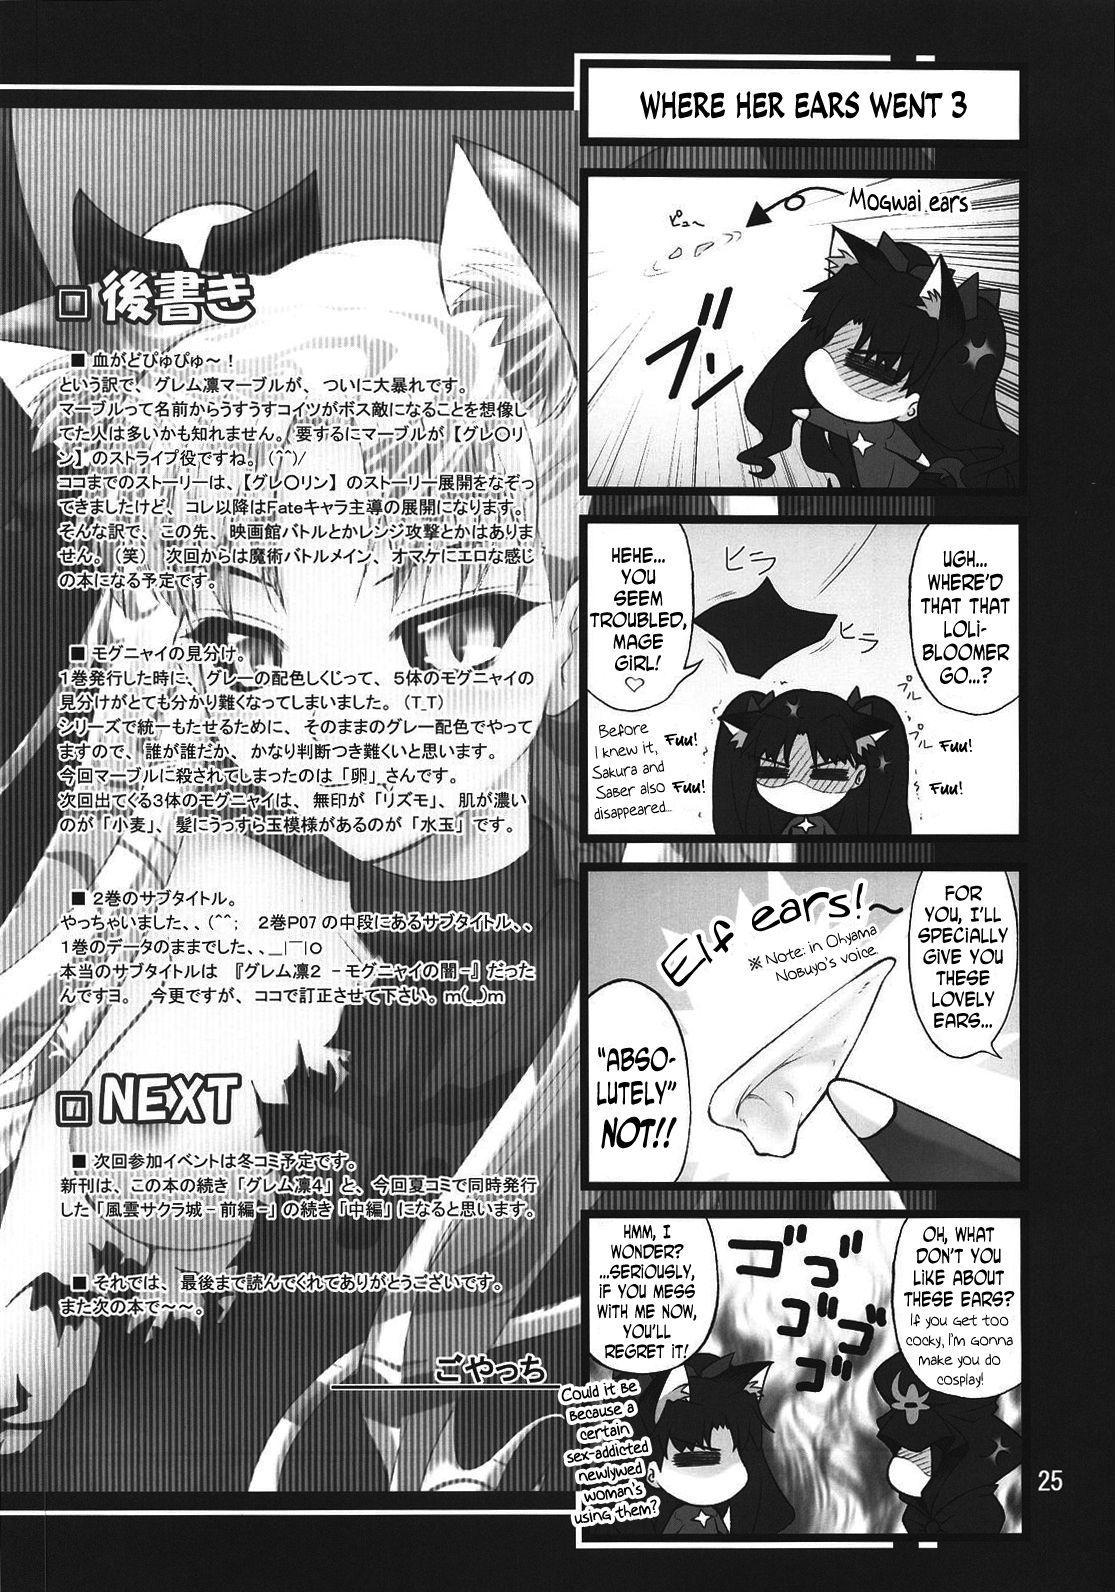 Gay Money Grem-Rin 3 - Fate stay night Lez Hardcore - Page 24